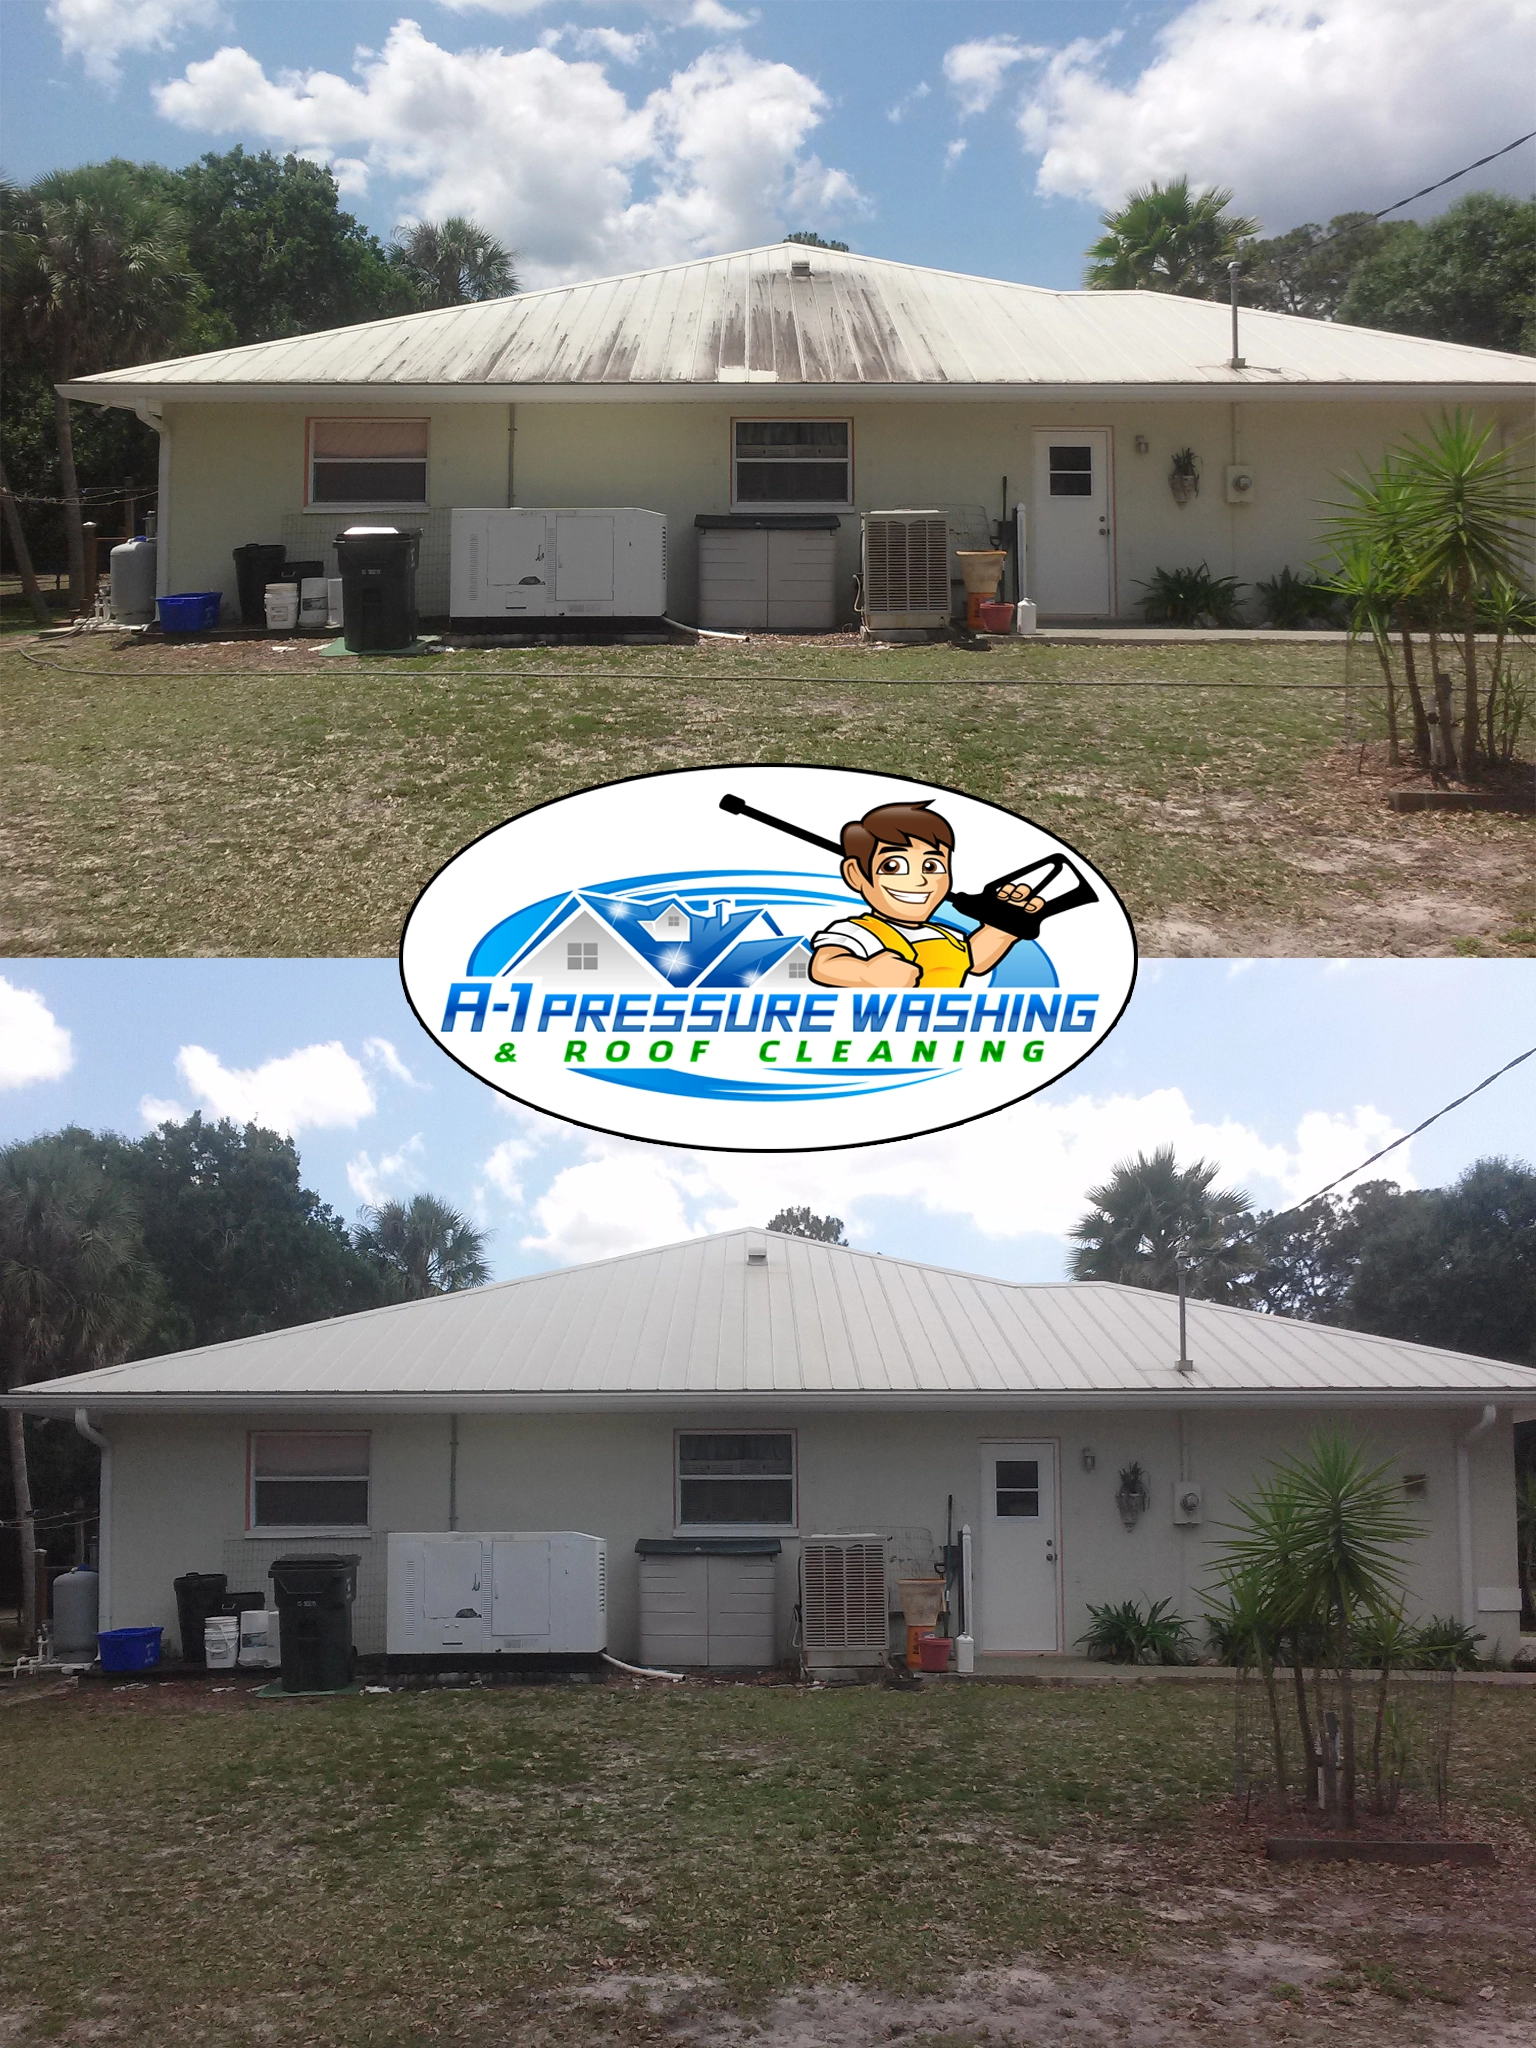 Metal Roof Cleaning | A-1 Pressure Washing & Roof Cleaning | 941-815-8454 